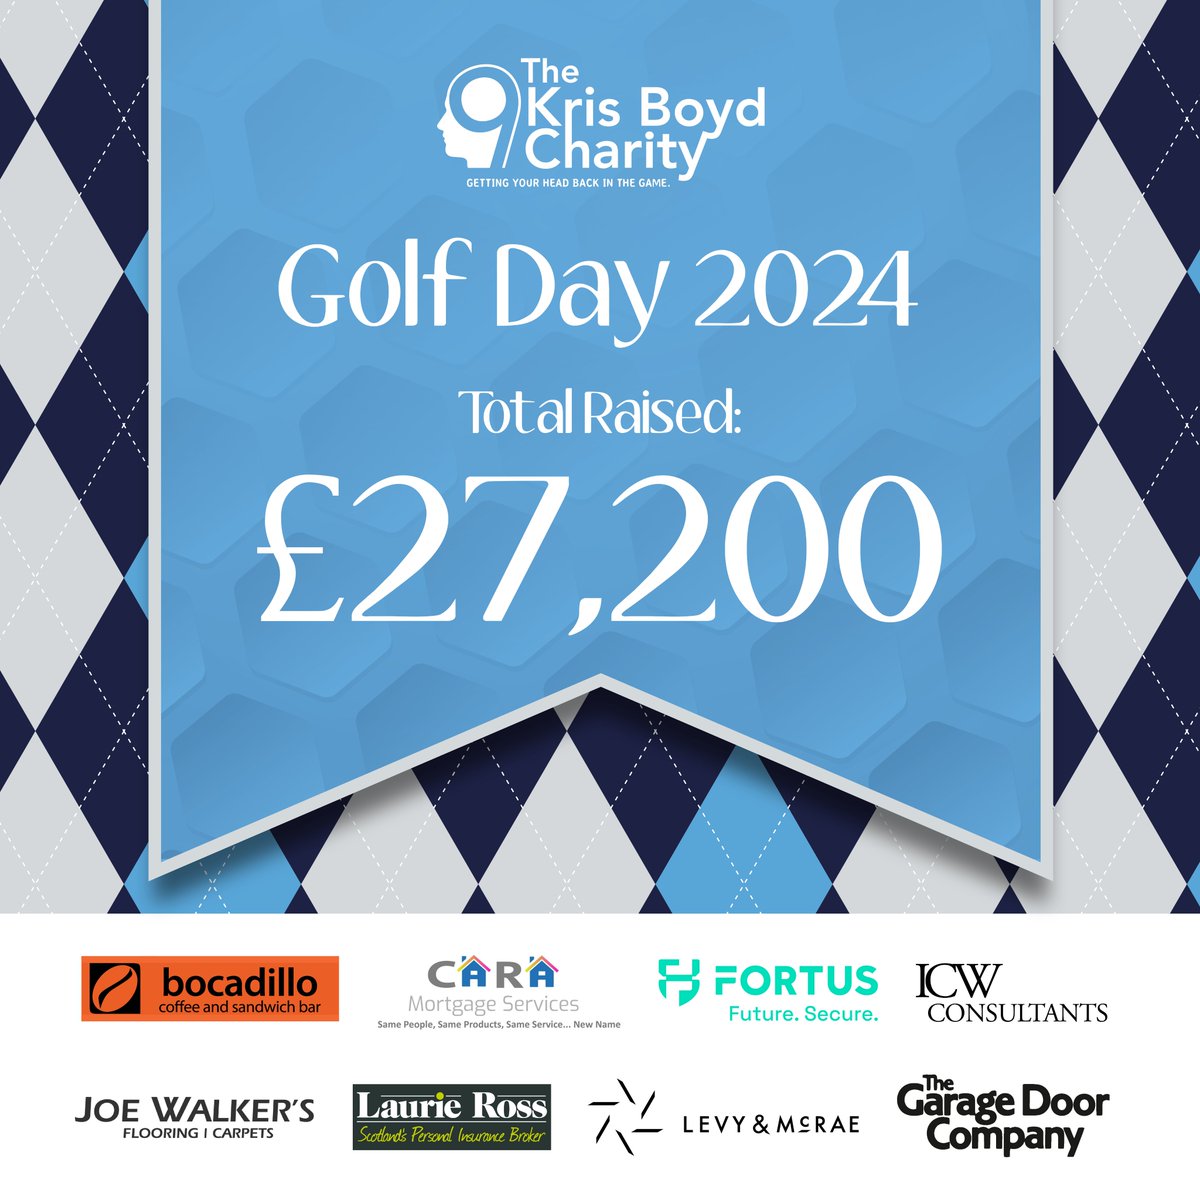 🌟 A HEARTFELT THANK YOU! 🙌 We're overjoyed to announce that our Golf Day raised an incredible £27,200! 🎉 Thank you goes to our generous sponsors and supporters whose kindness made this possible. Together, we're making a positive impact! 💙✨